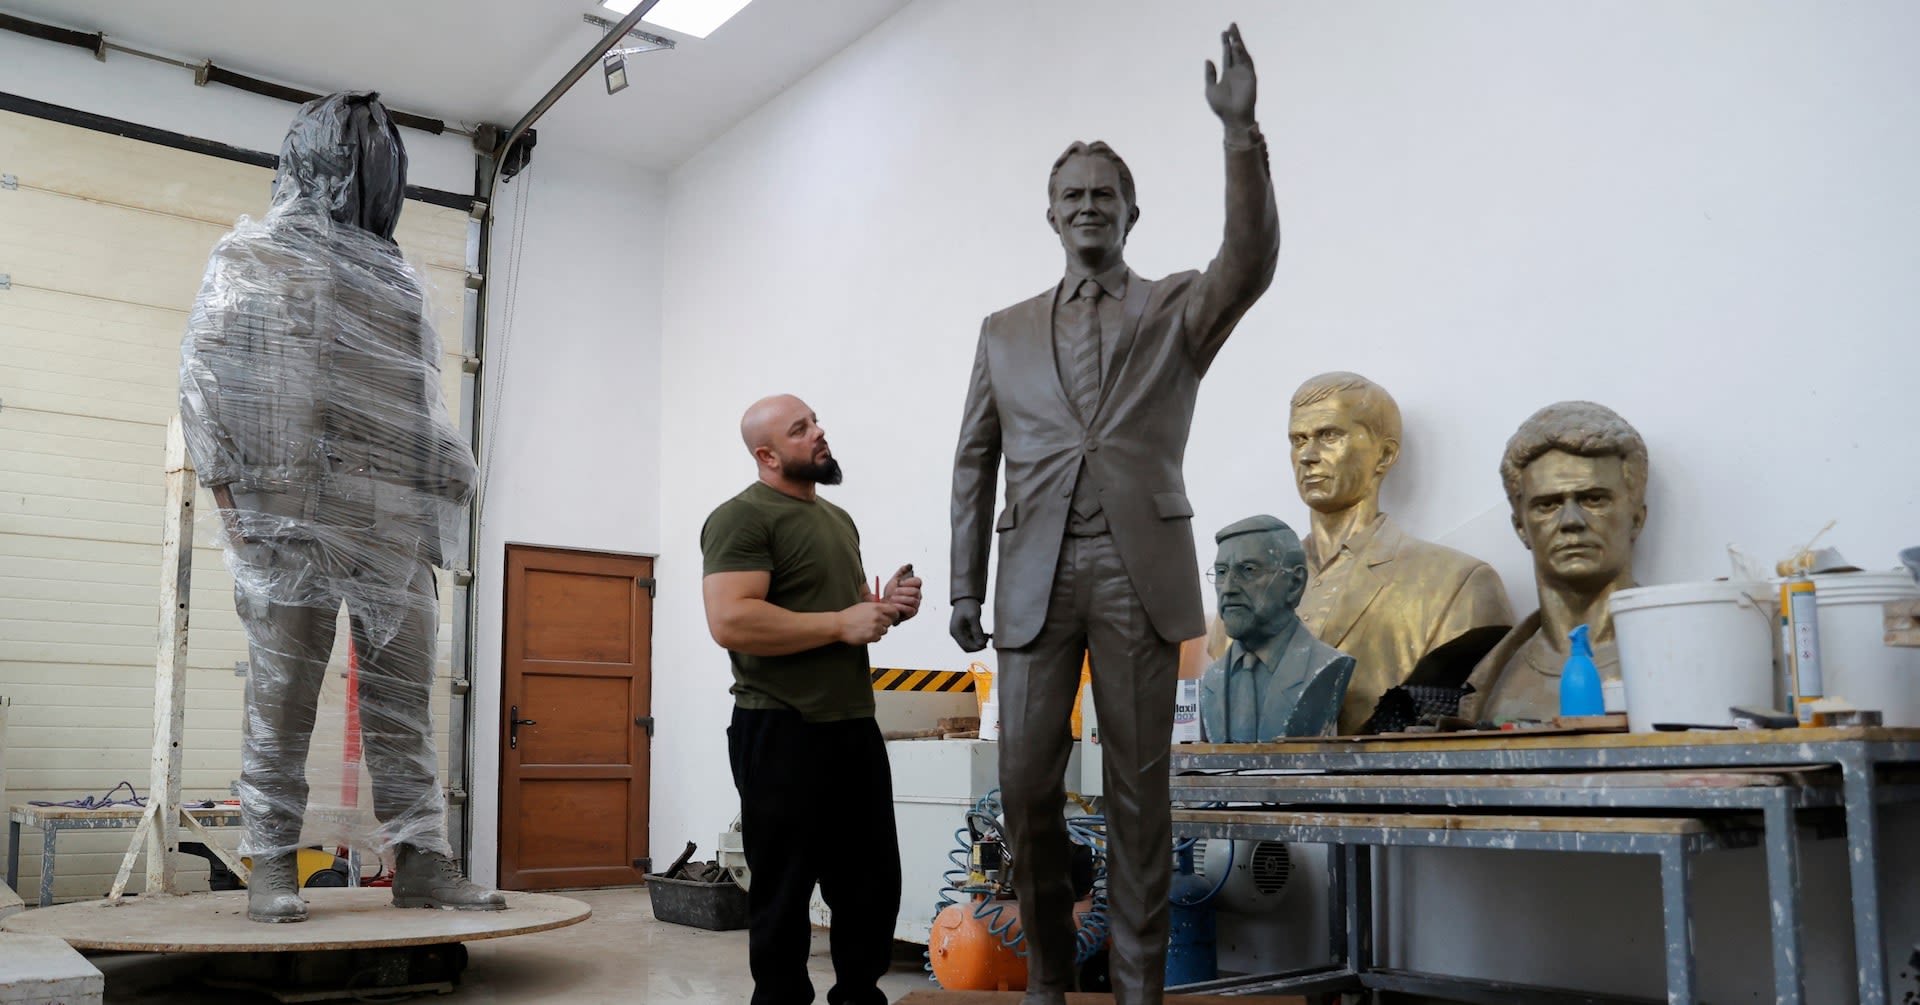 Statue to Tony Blair honours "Tonibler" cult in Kosovo